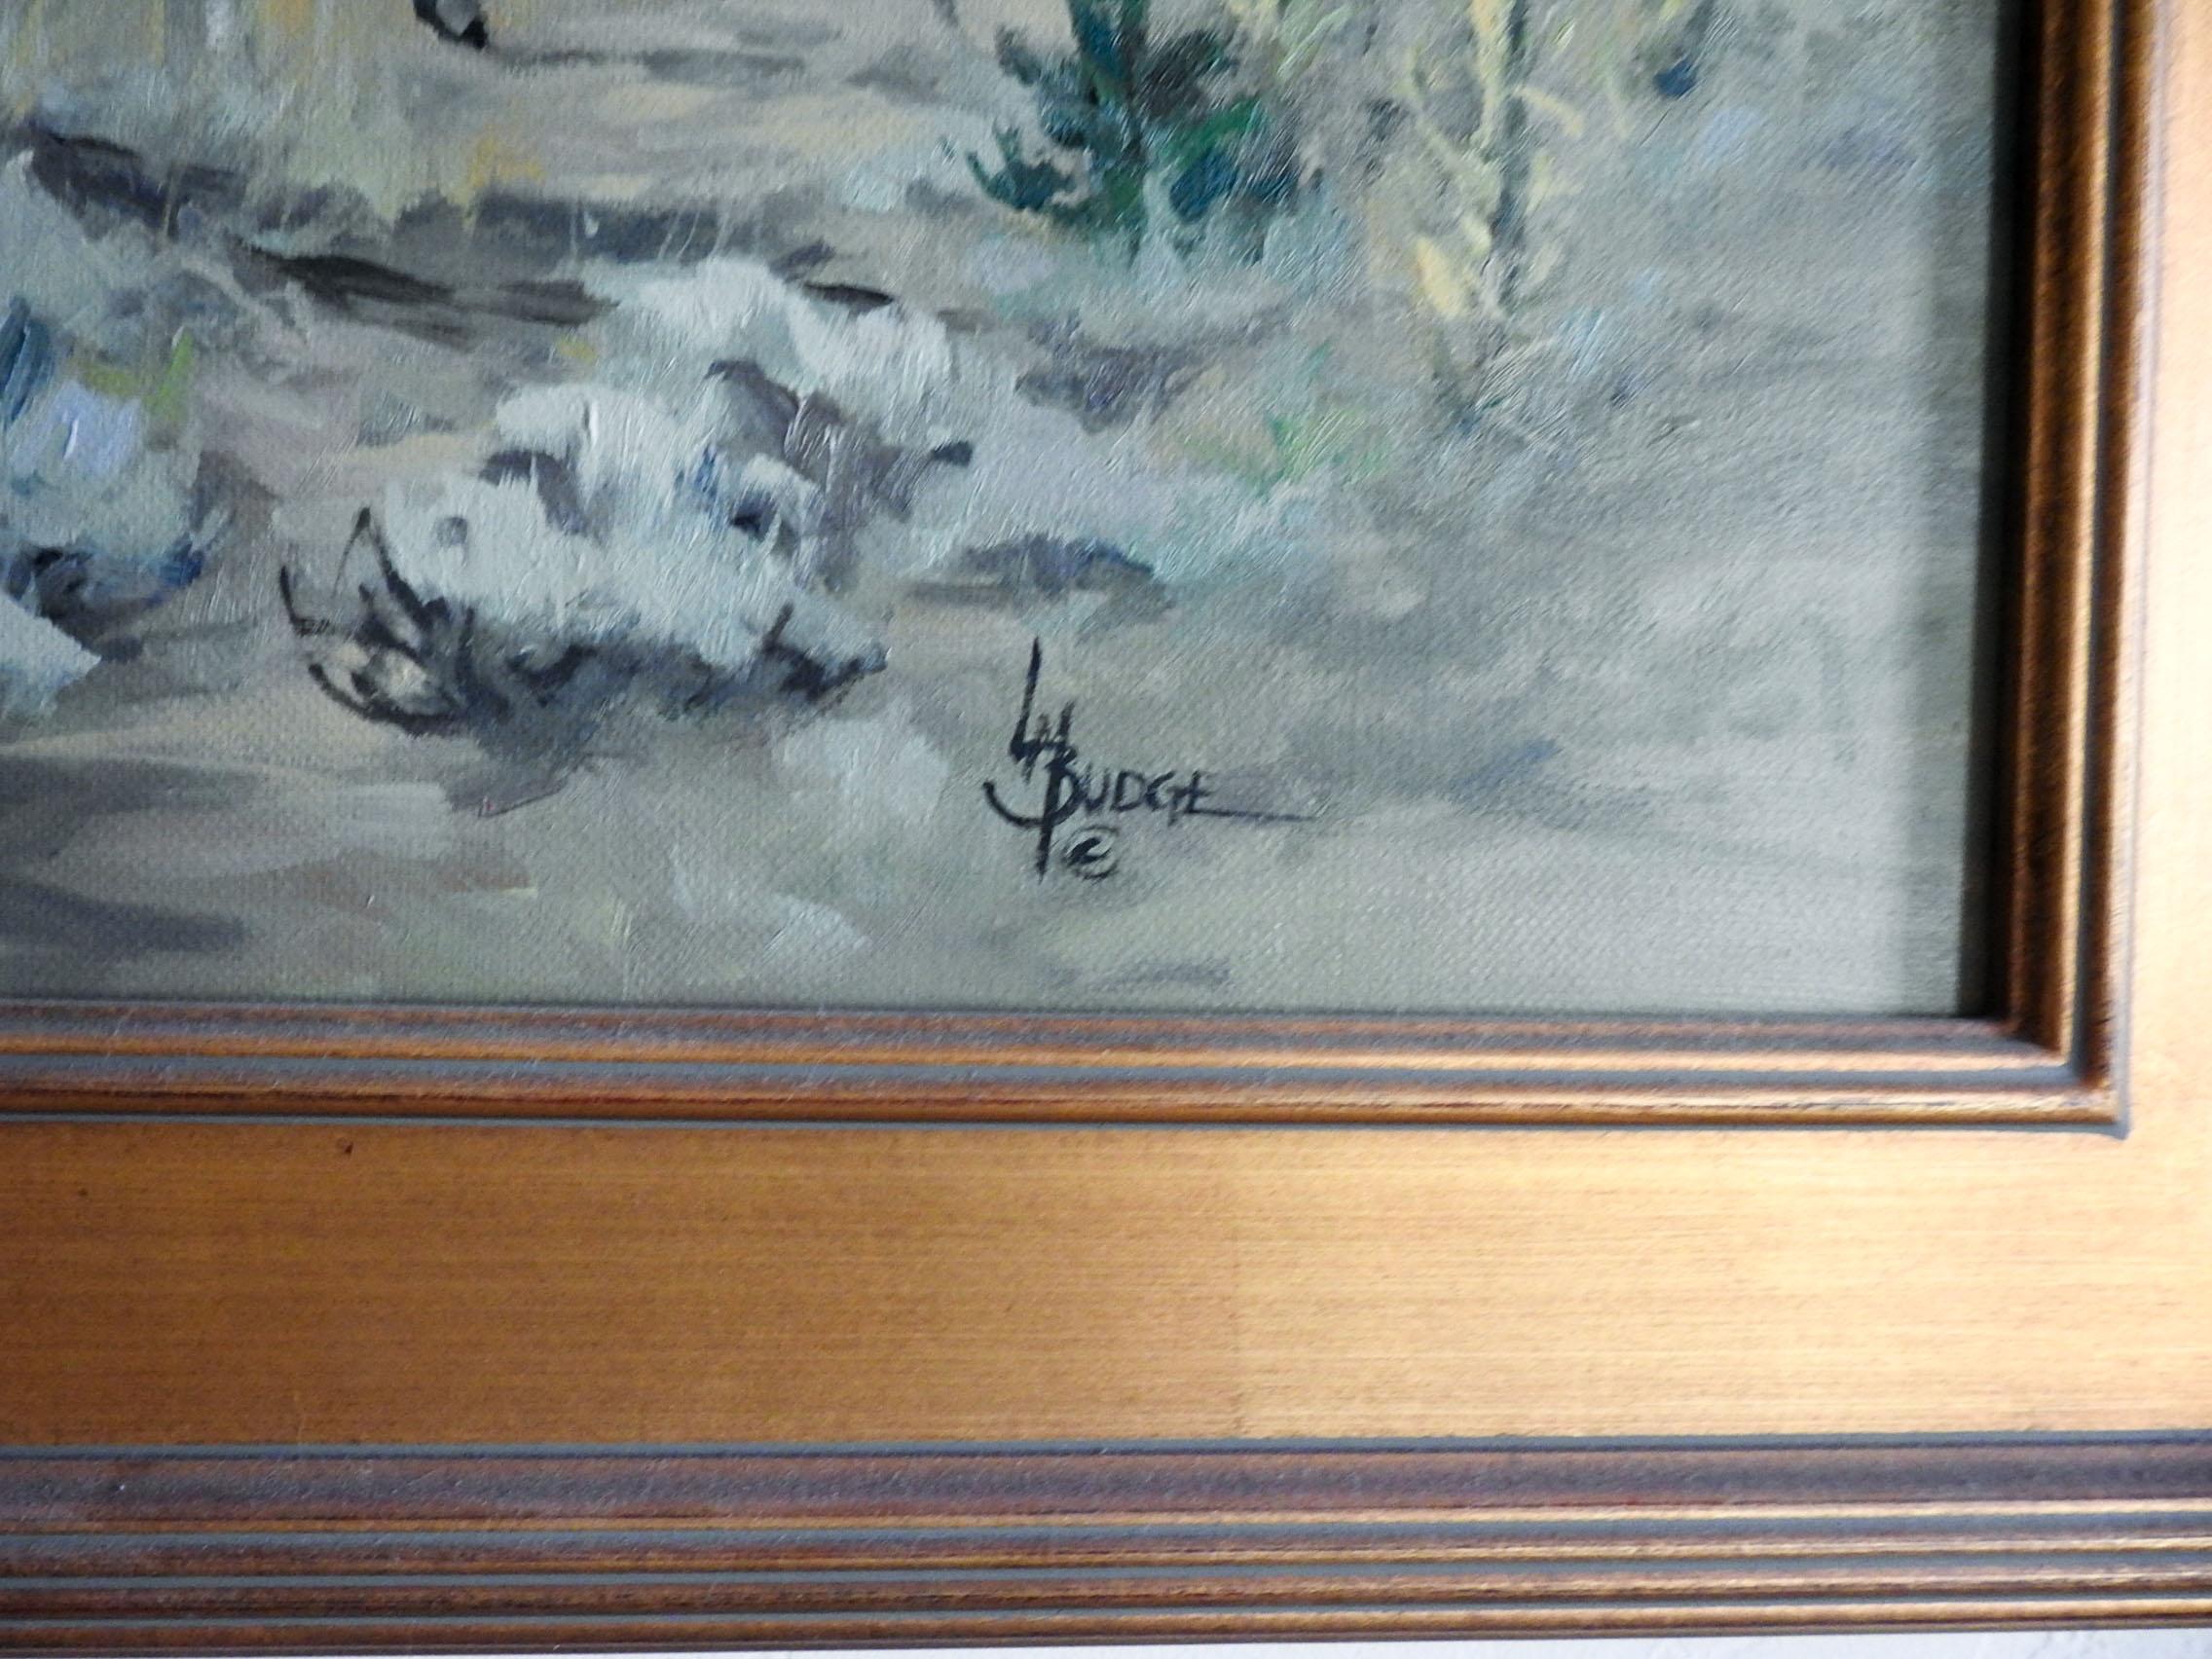 Oil on canvas of mule deer by Linda Budge. Signed lower right corner. Displayed in giltwood frame, opening size 23.5